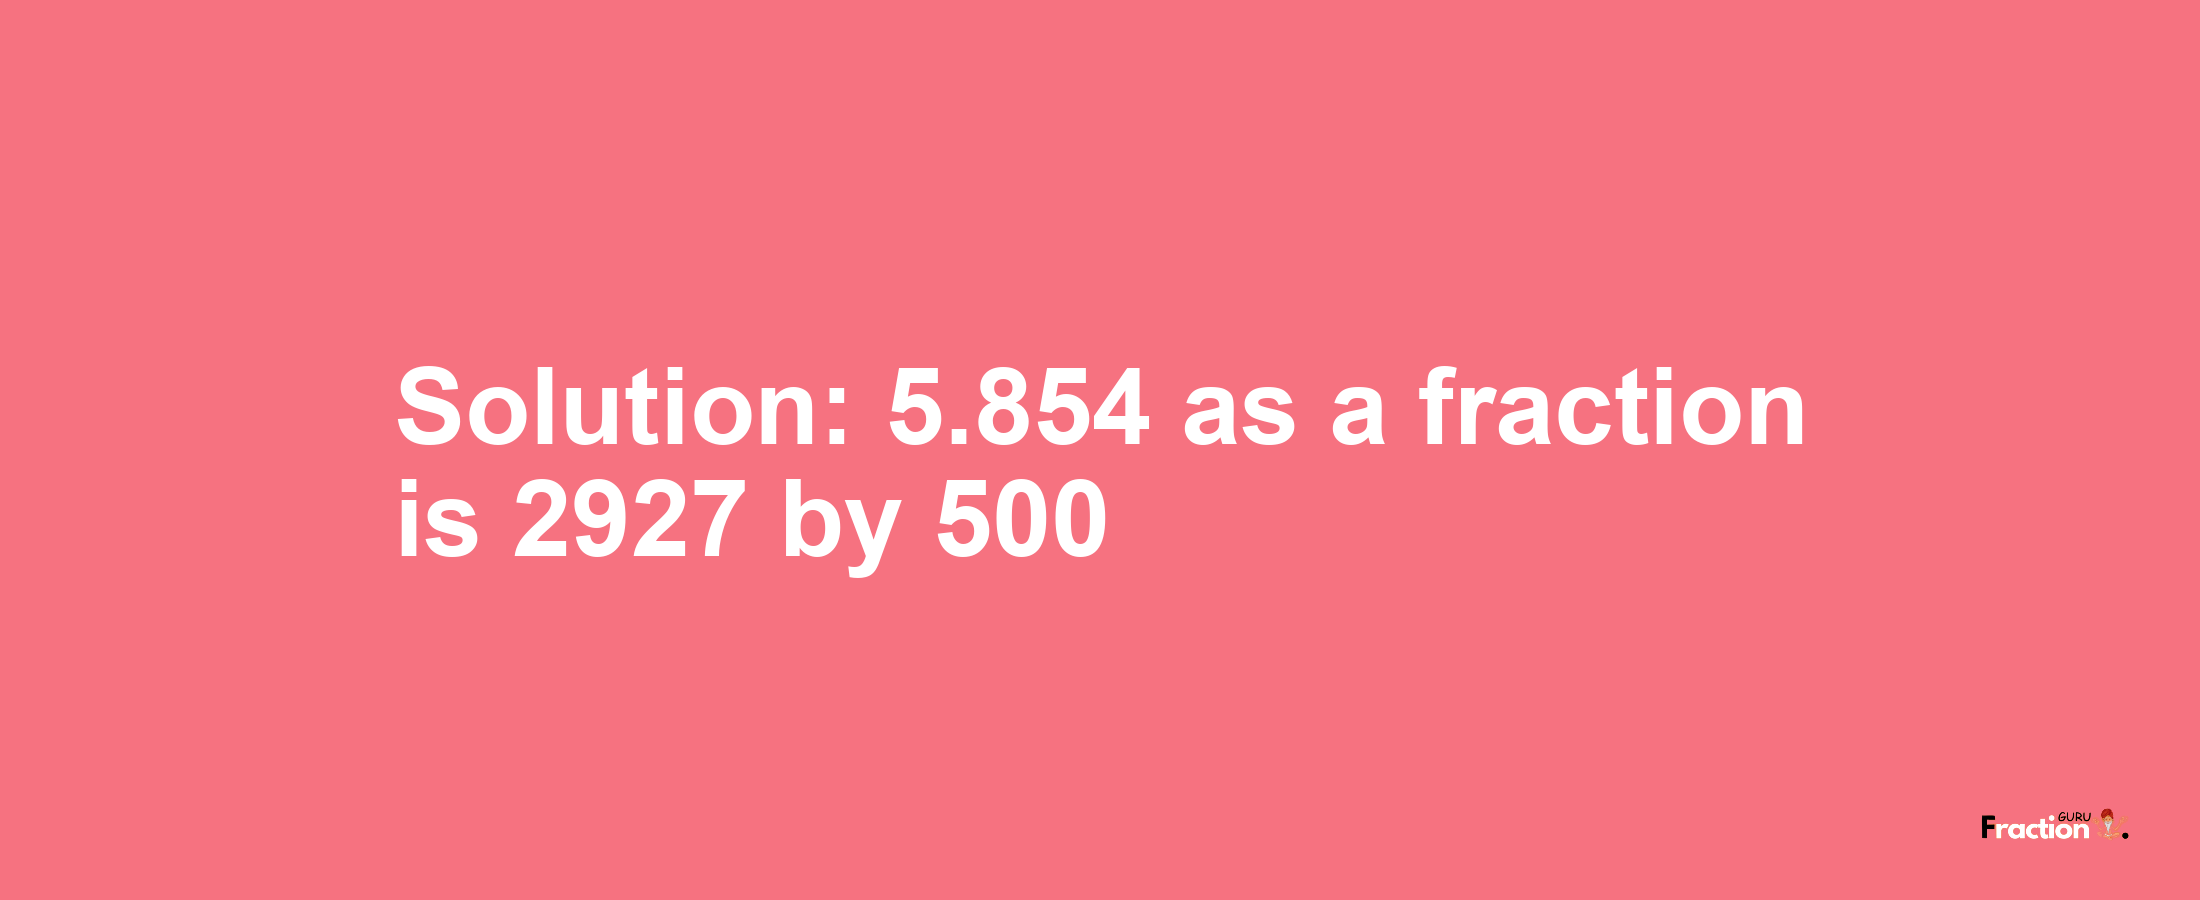 Solution:5.854 as a fraction is 2927/500